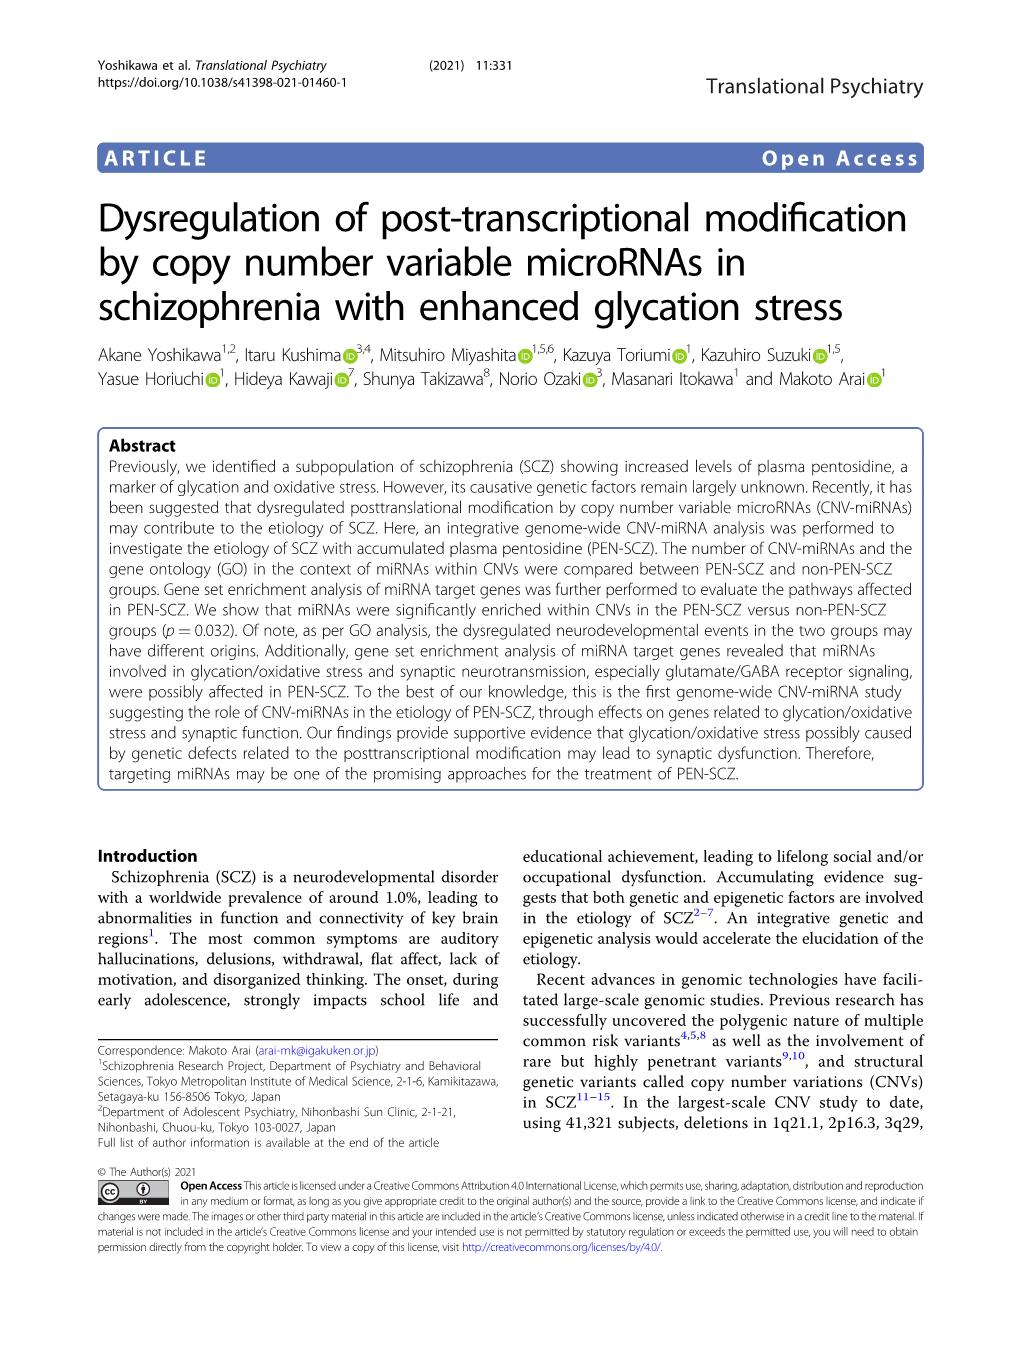 Dysregulation of Post-Transcriptional Modification by Copy Number